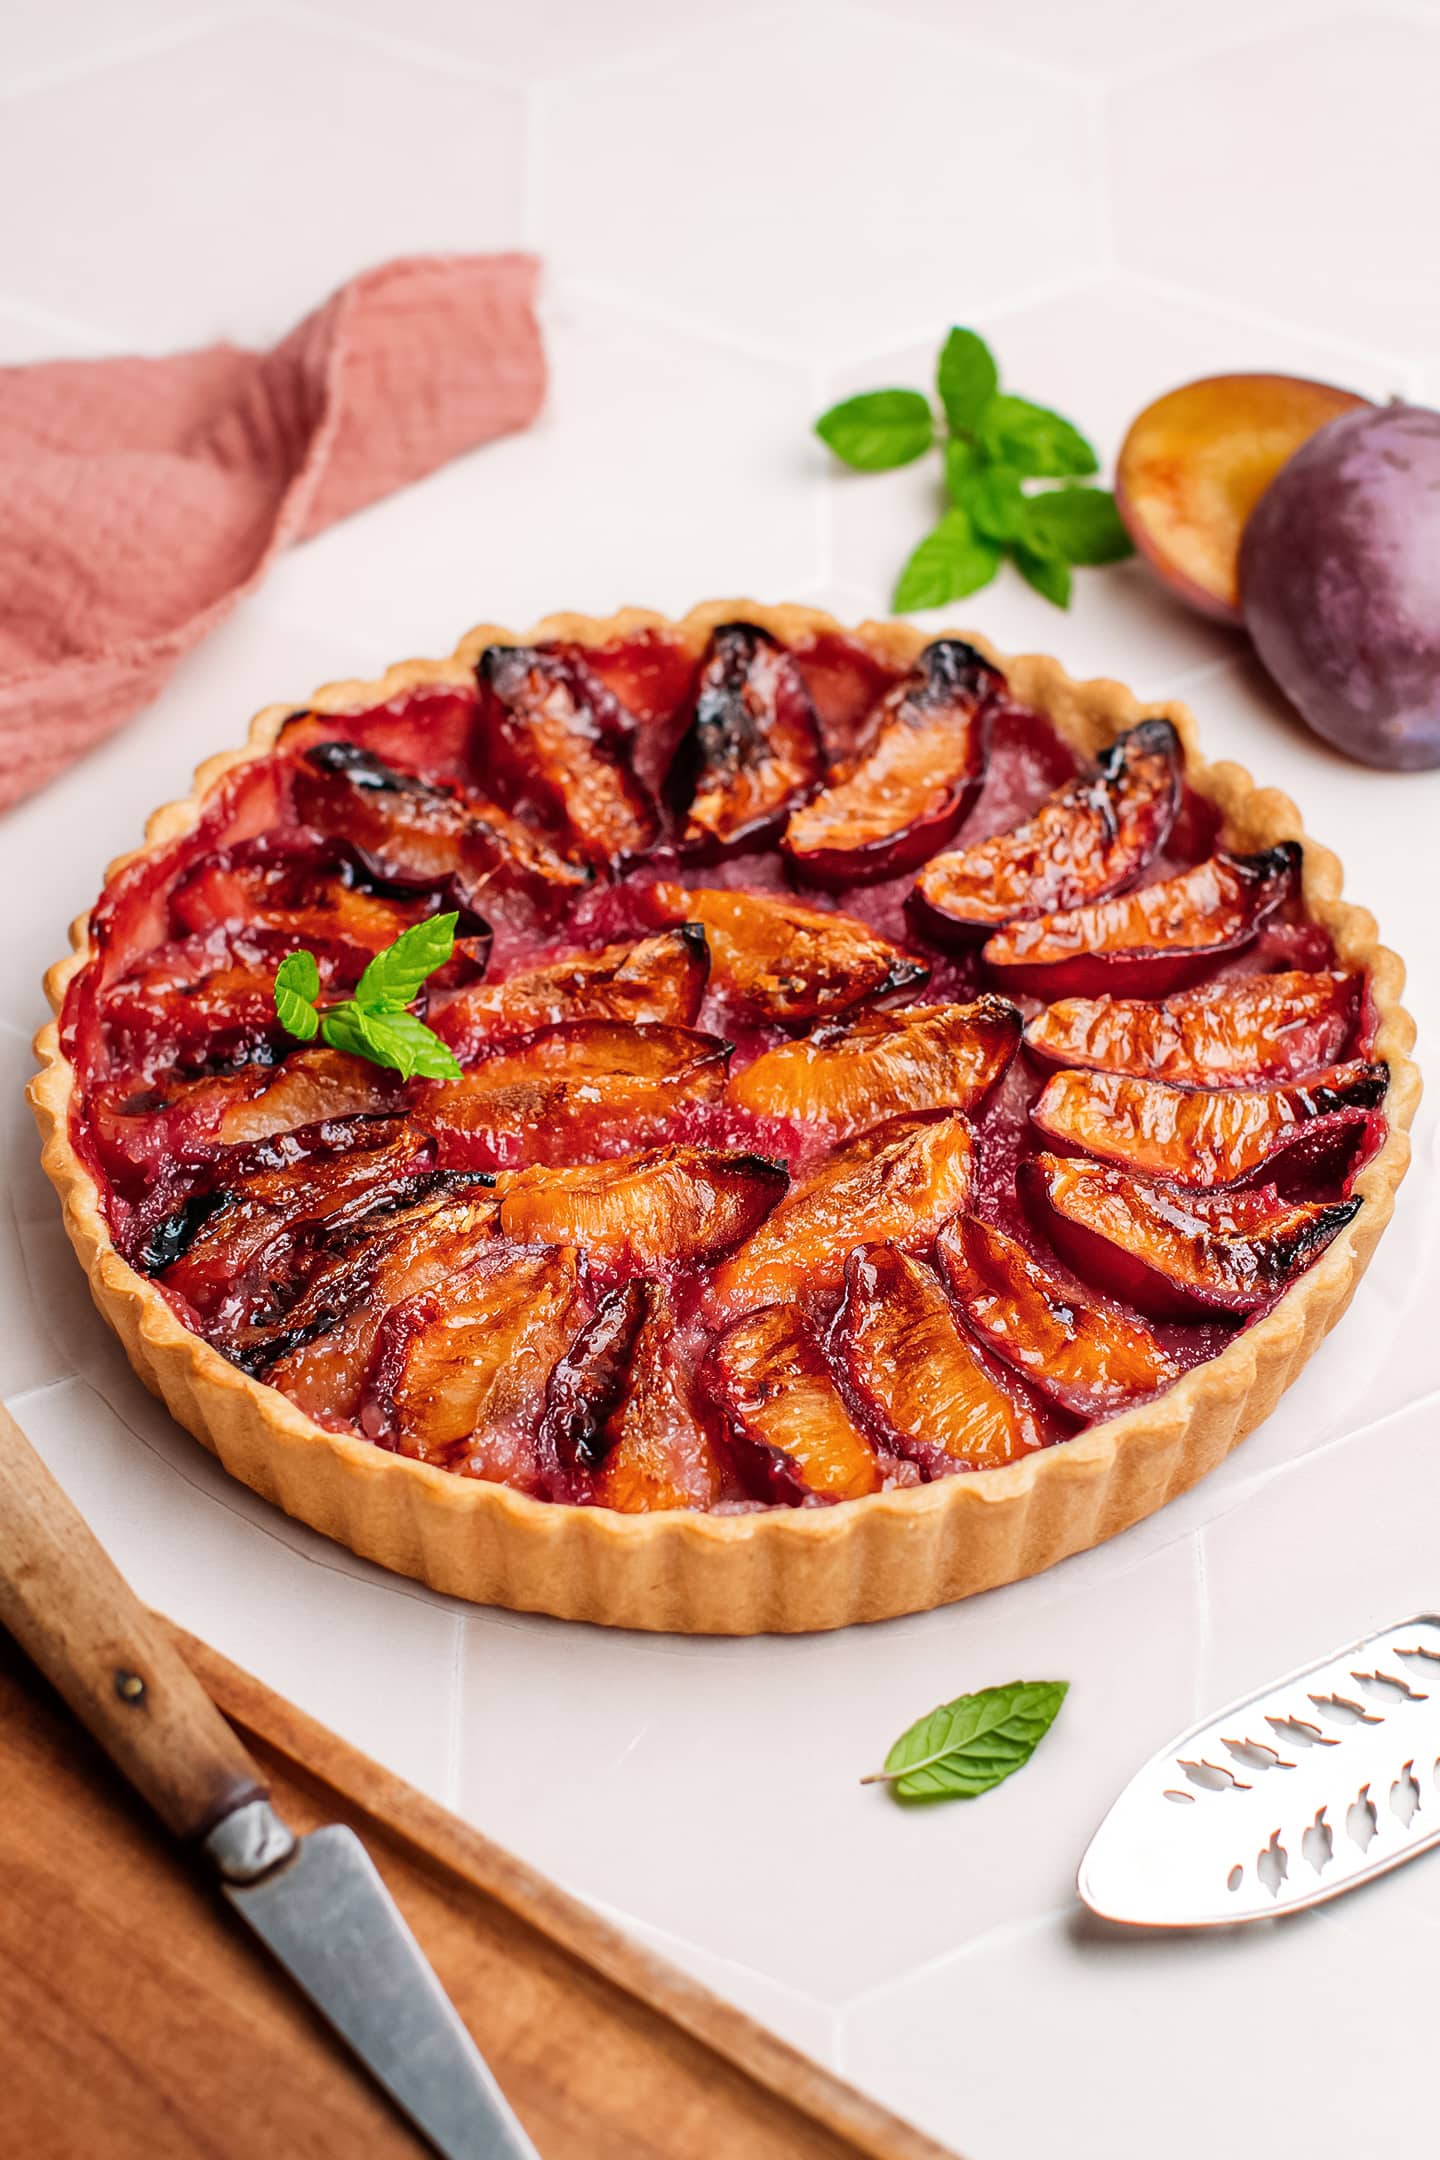 Whole plum tart topped with mint leaves.